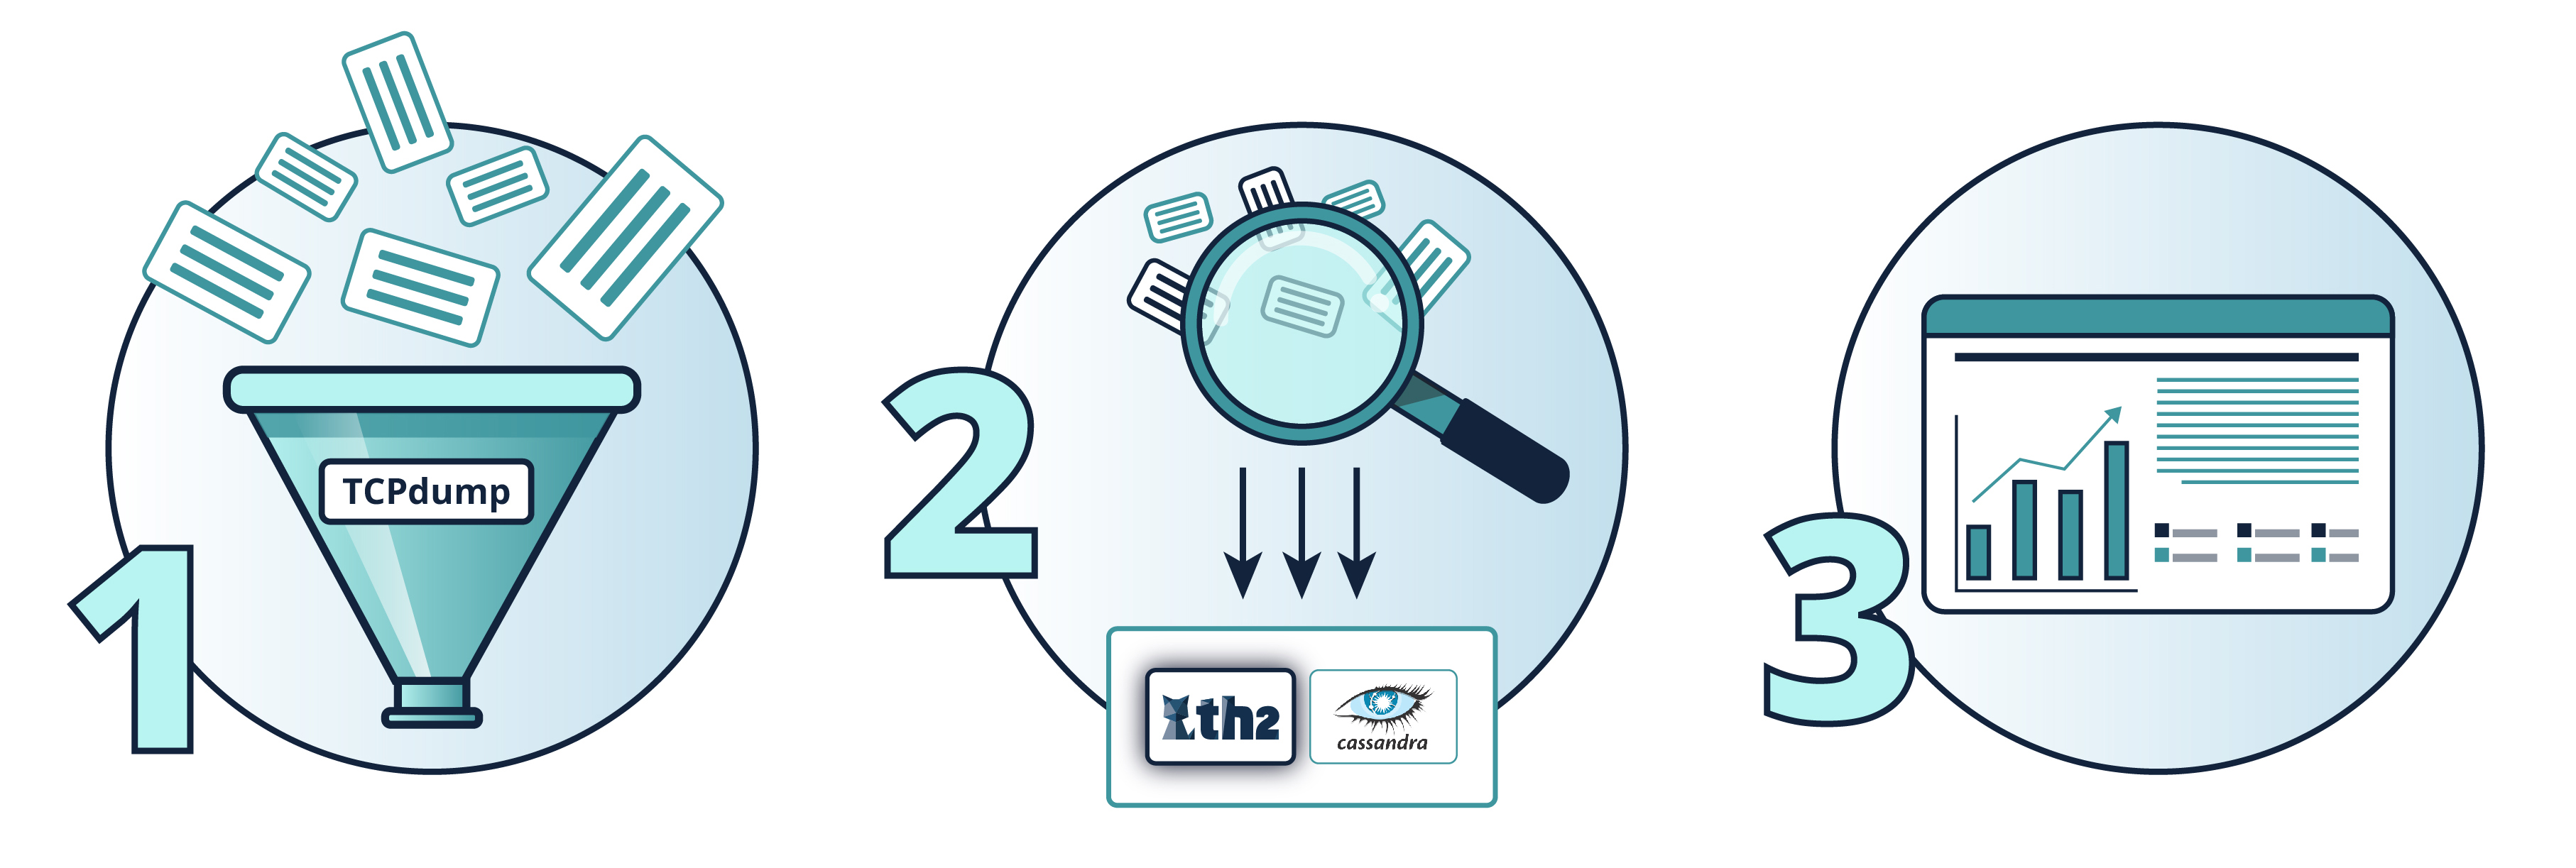 Stages of data handling with th2 Data Services